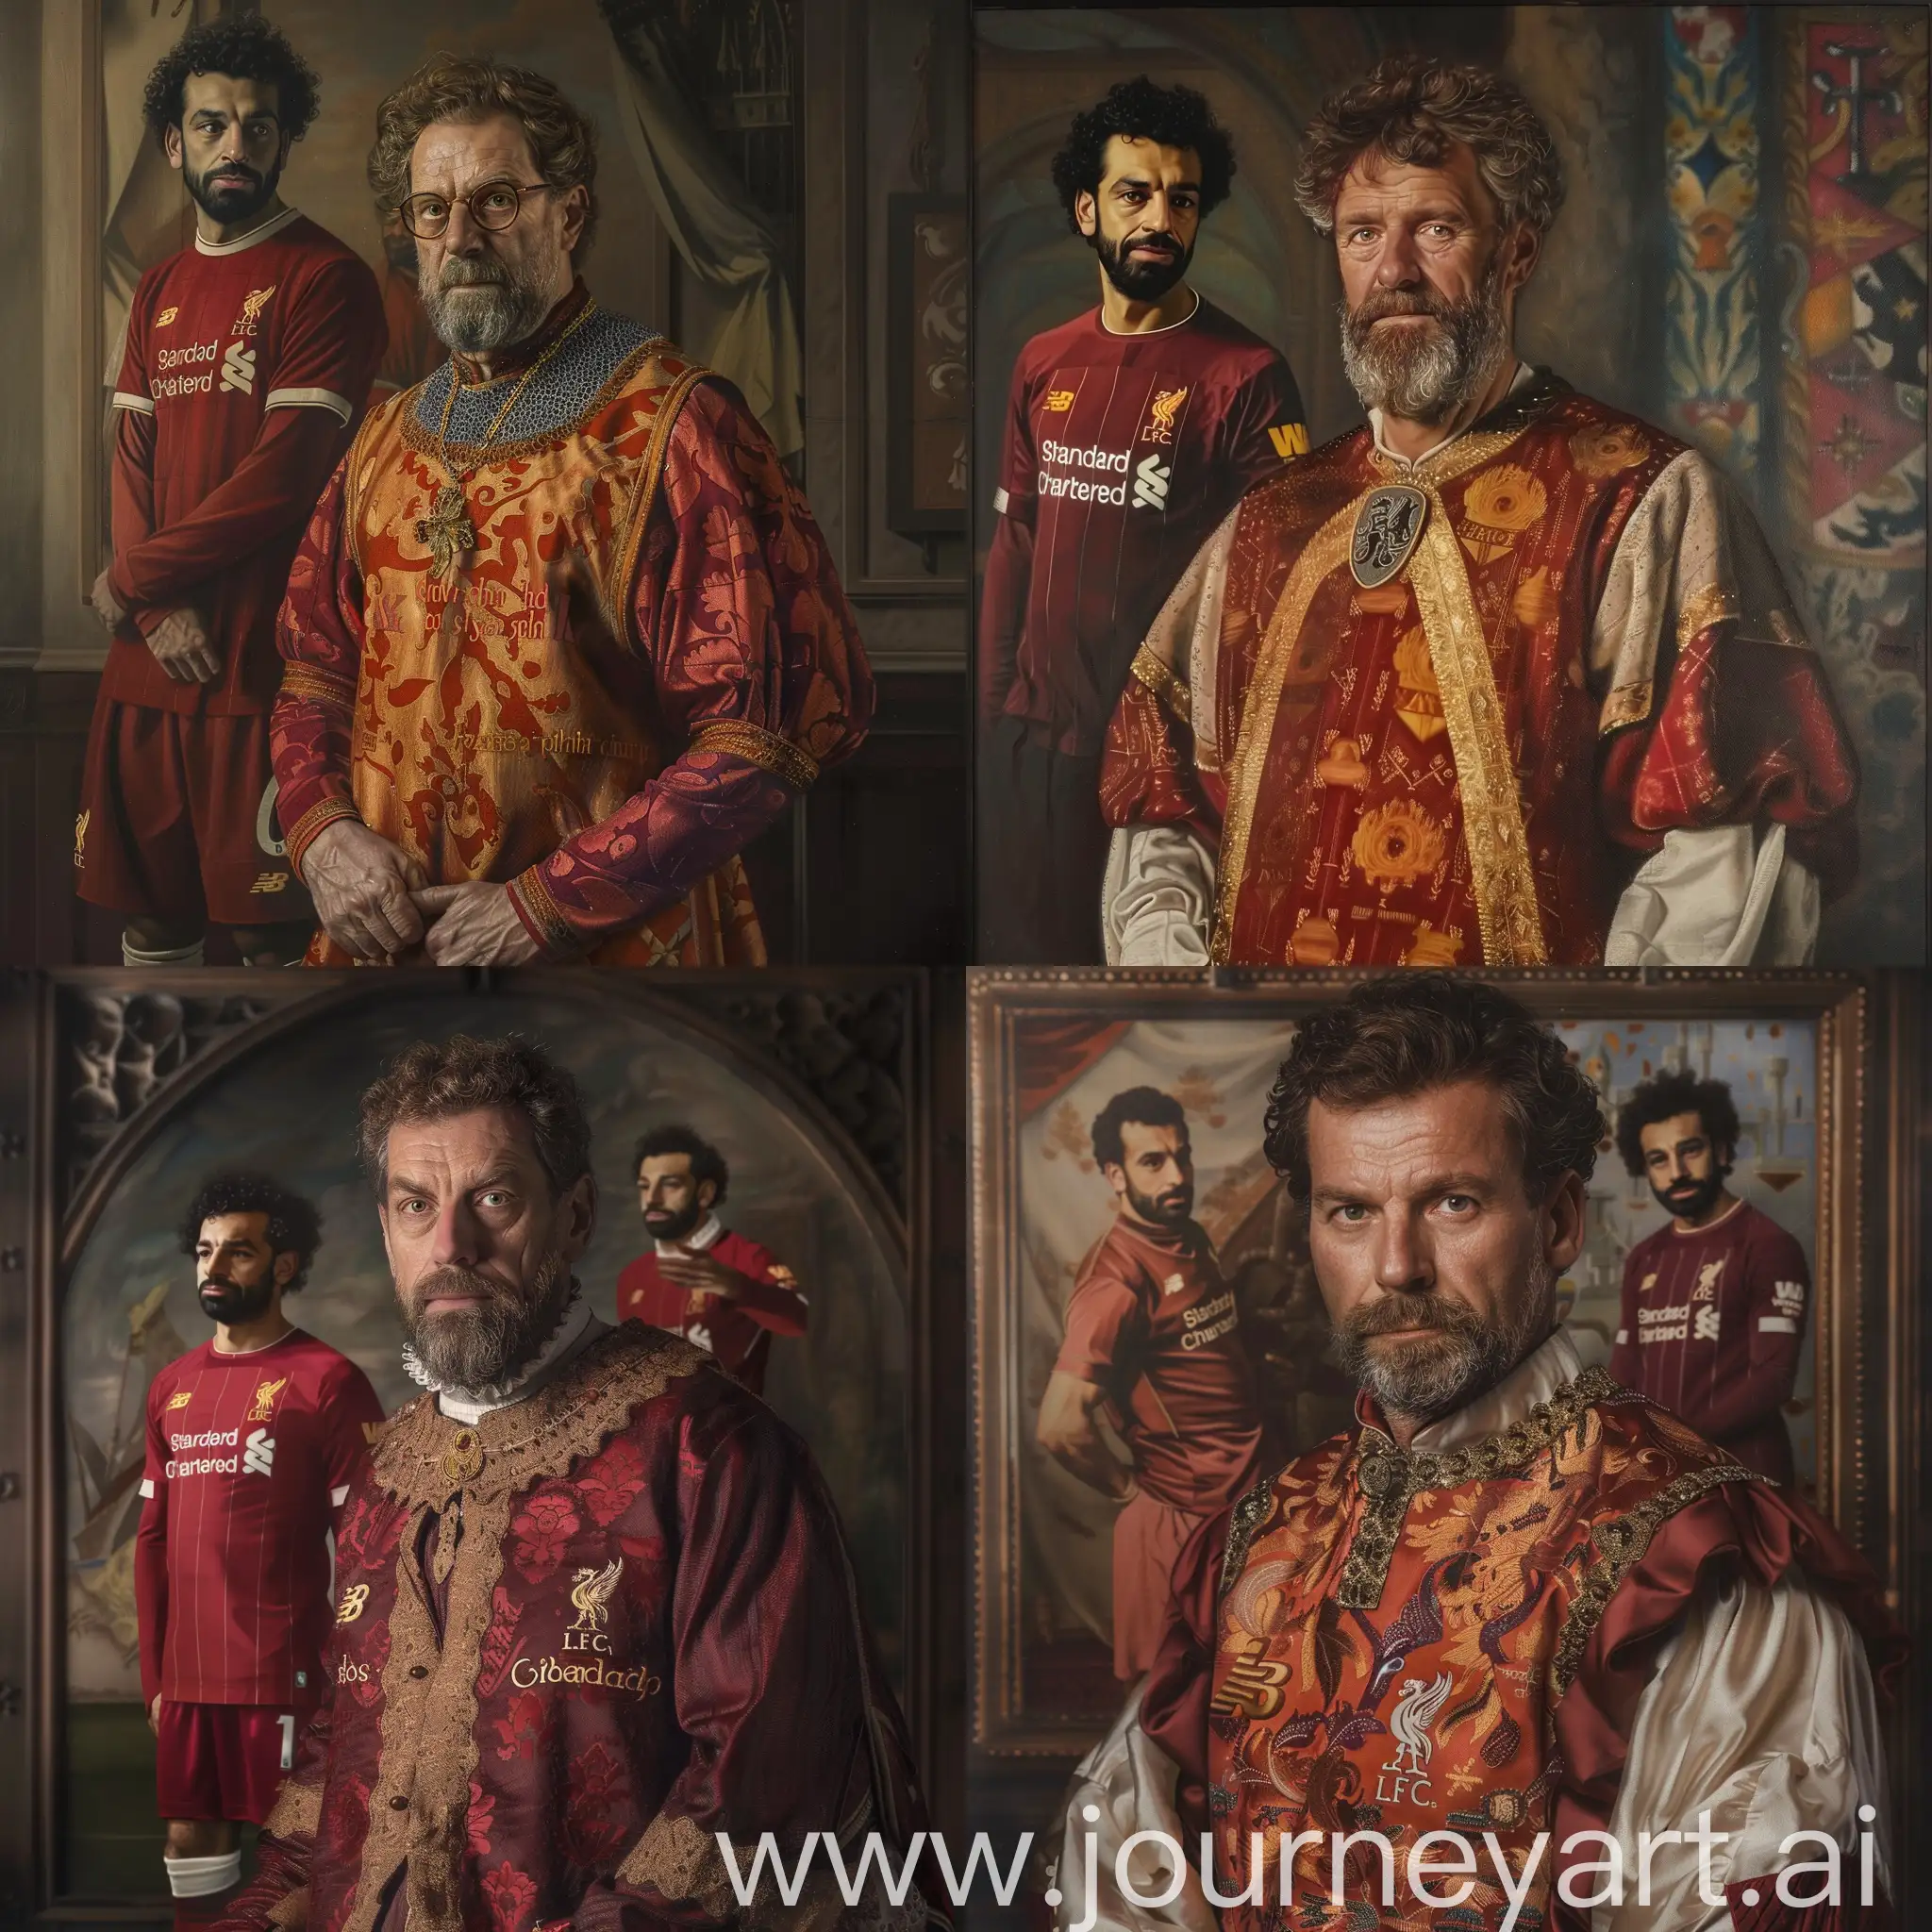 Royal portrait of an earl from 1400s england but he is jurgen klopp wearing a fancy version of a liverpool fc jersey and in the background is a painting of mohamed salah